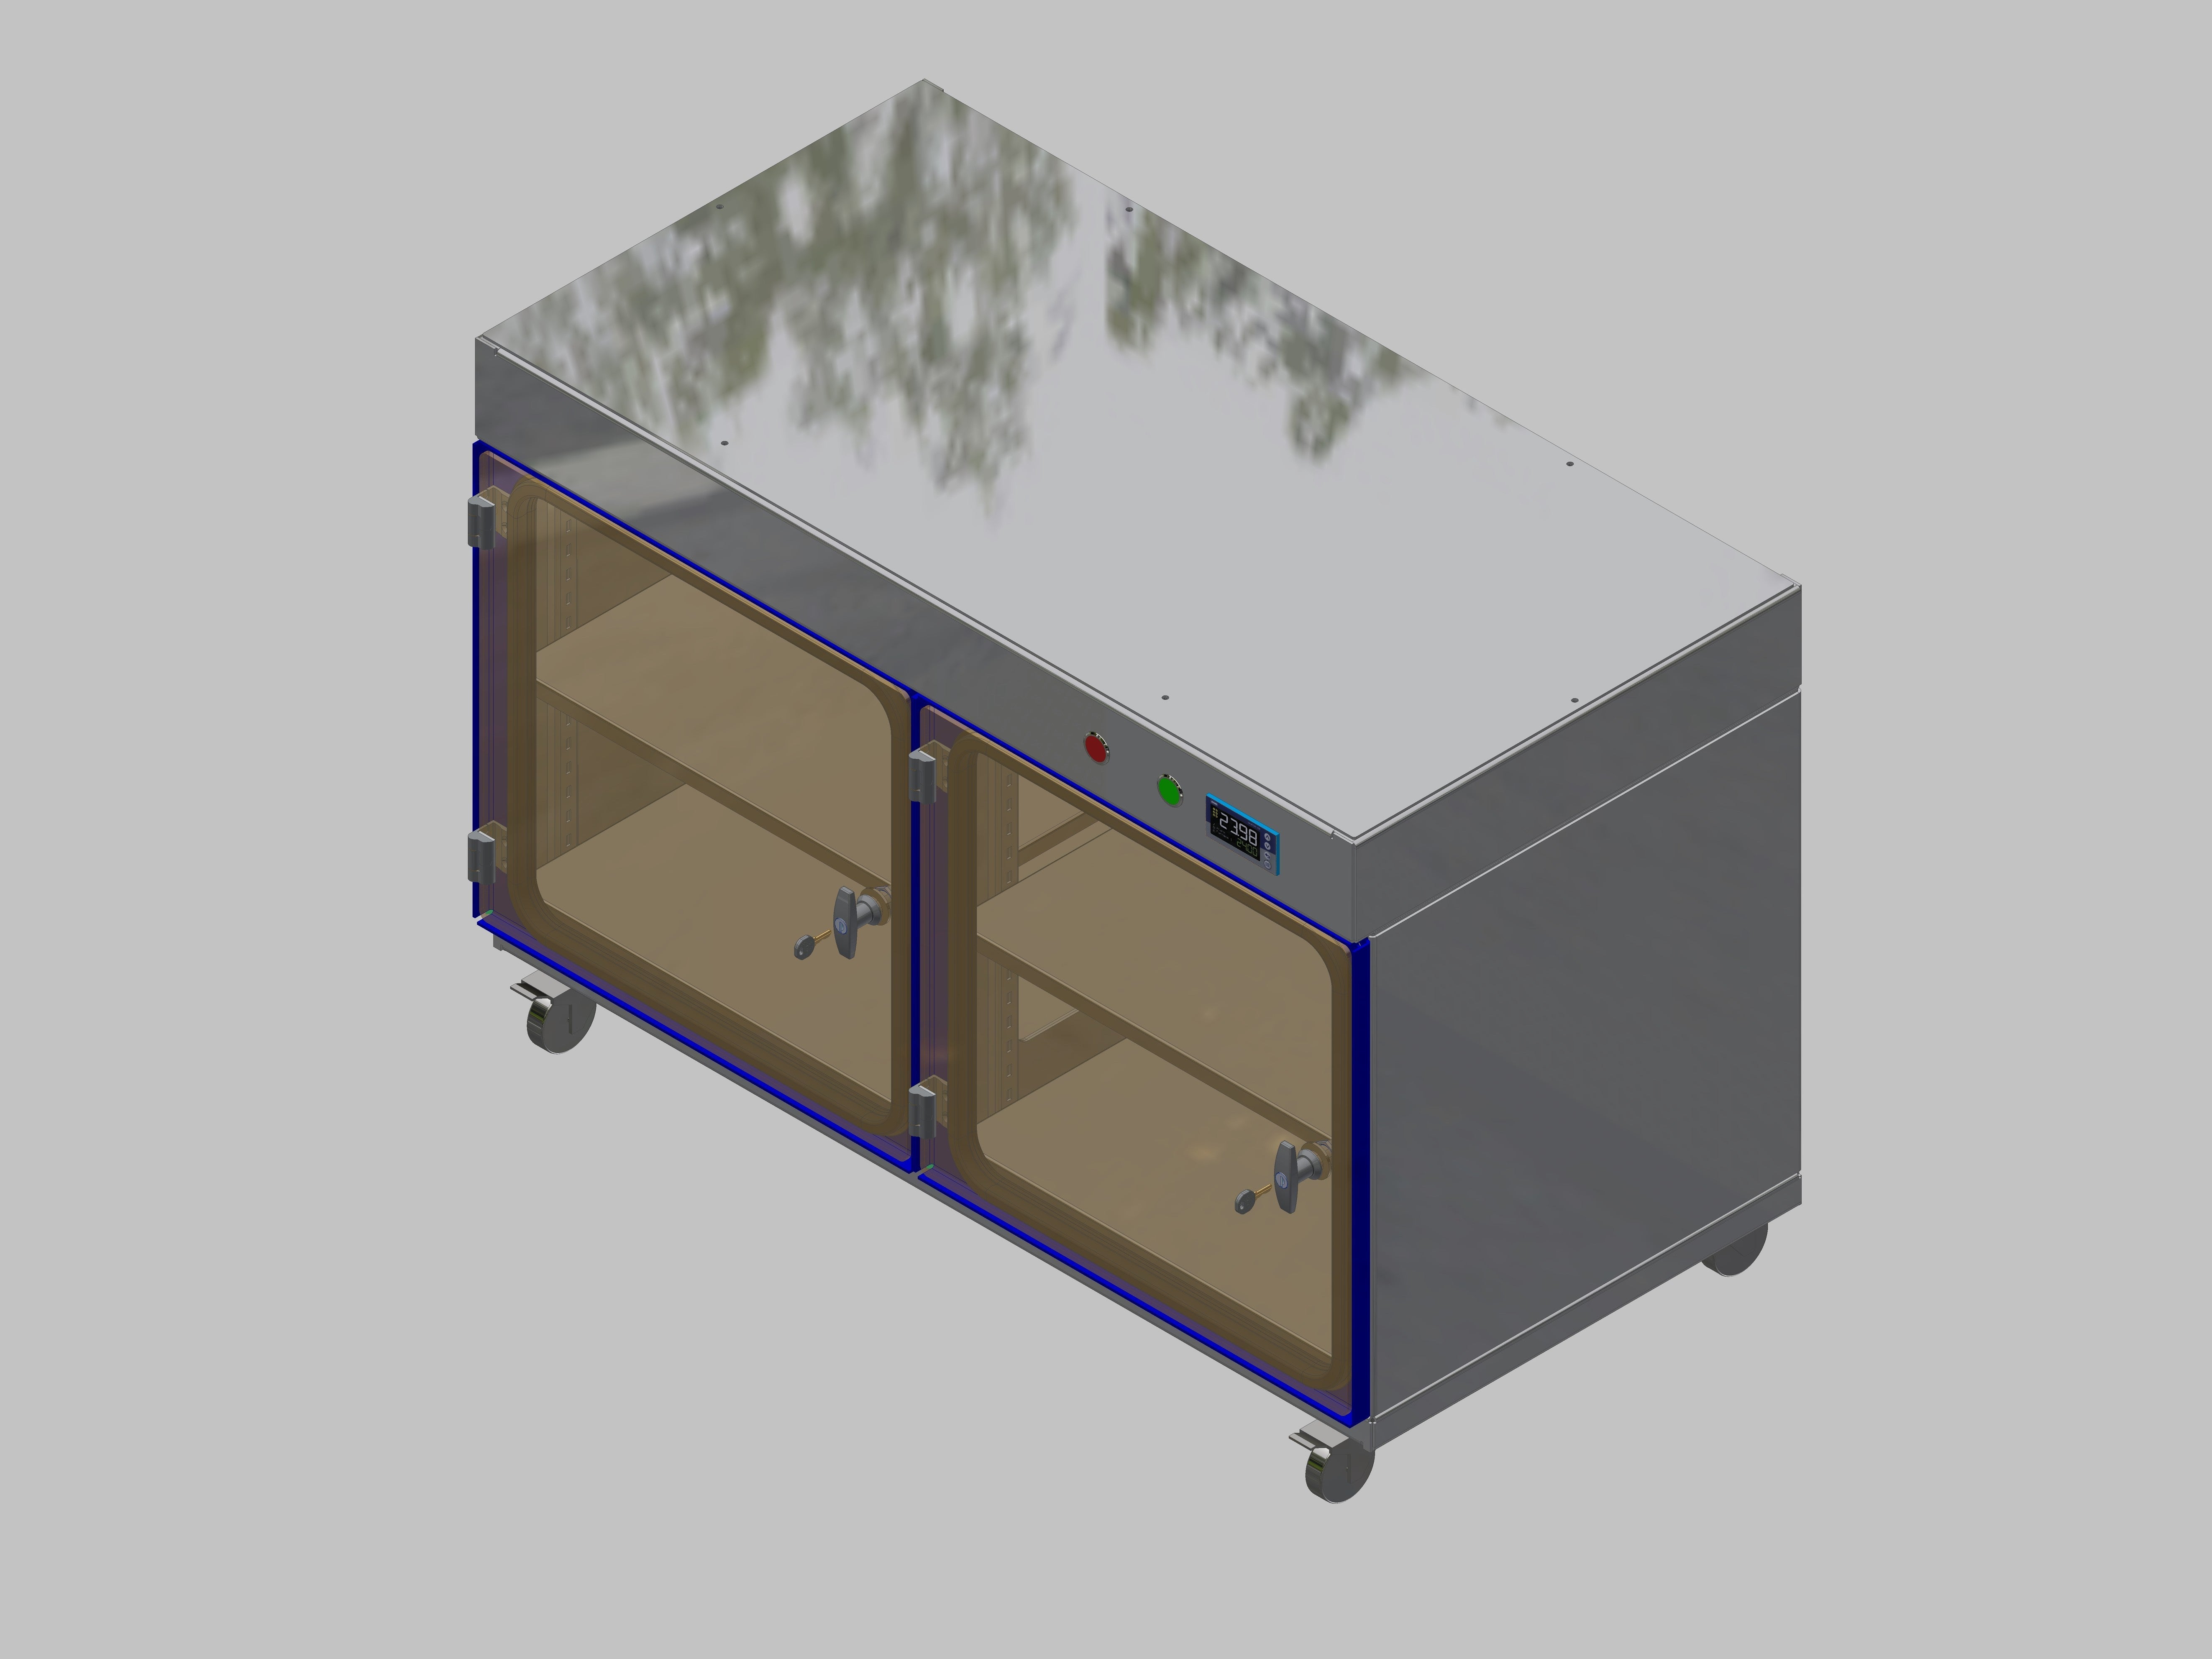 Dry storage cabinet-ITN-1200-2 with 2 shelves per compartment and base design with wheels